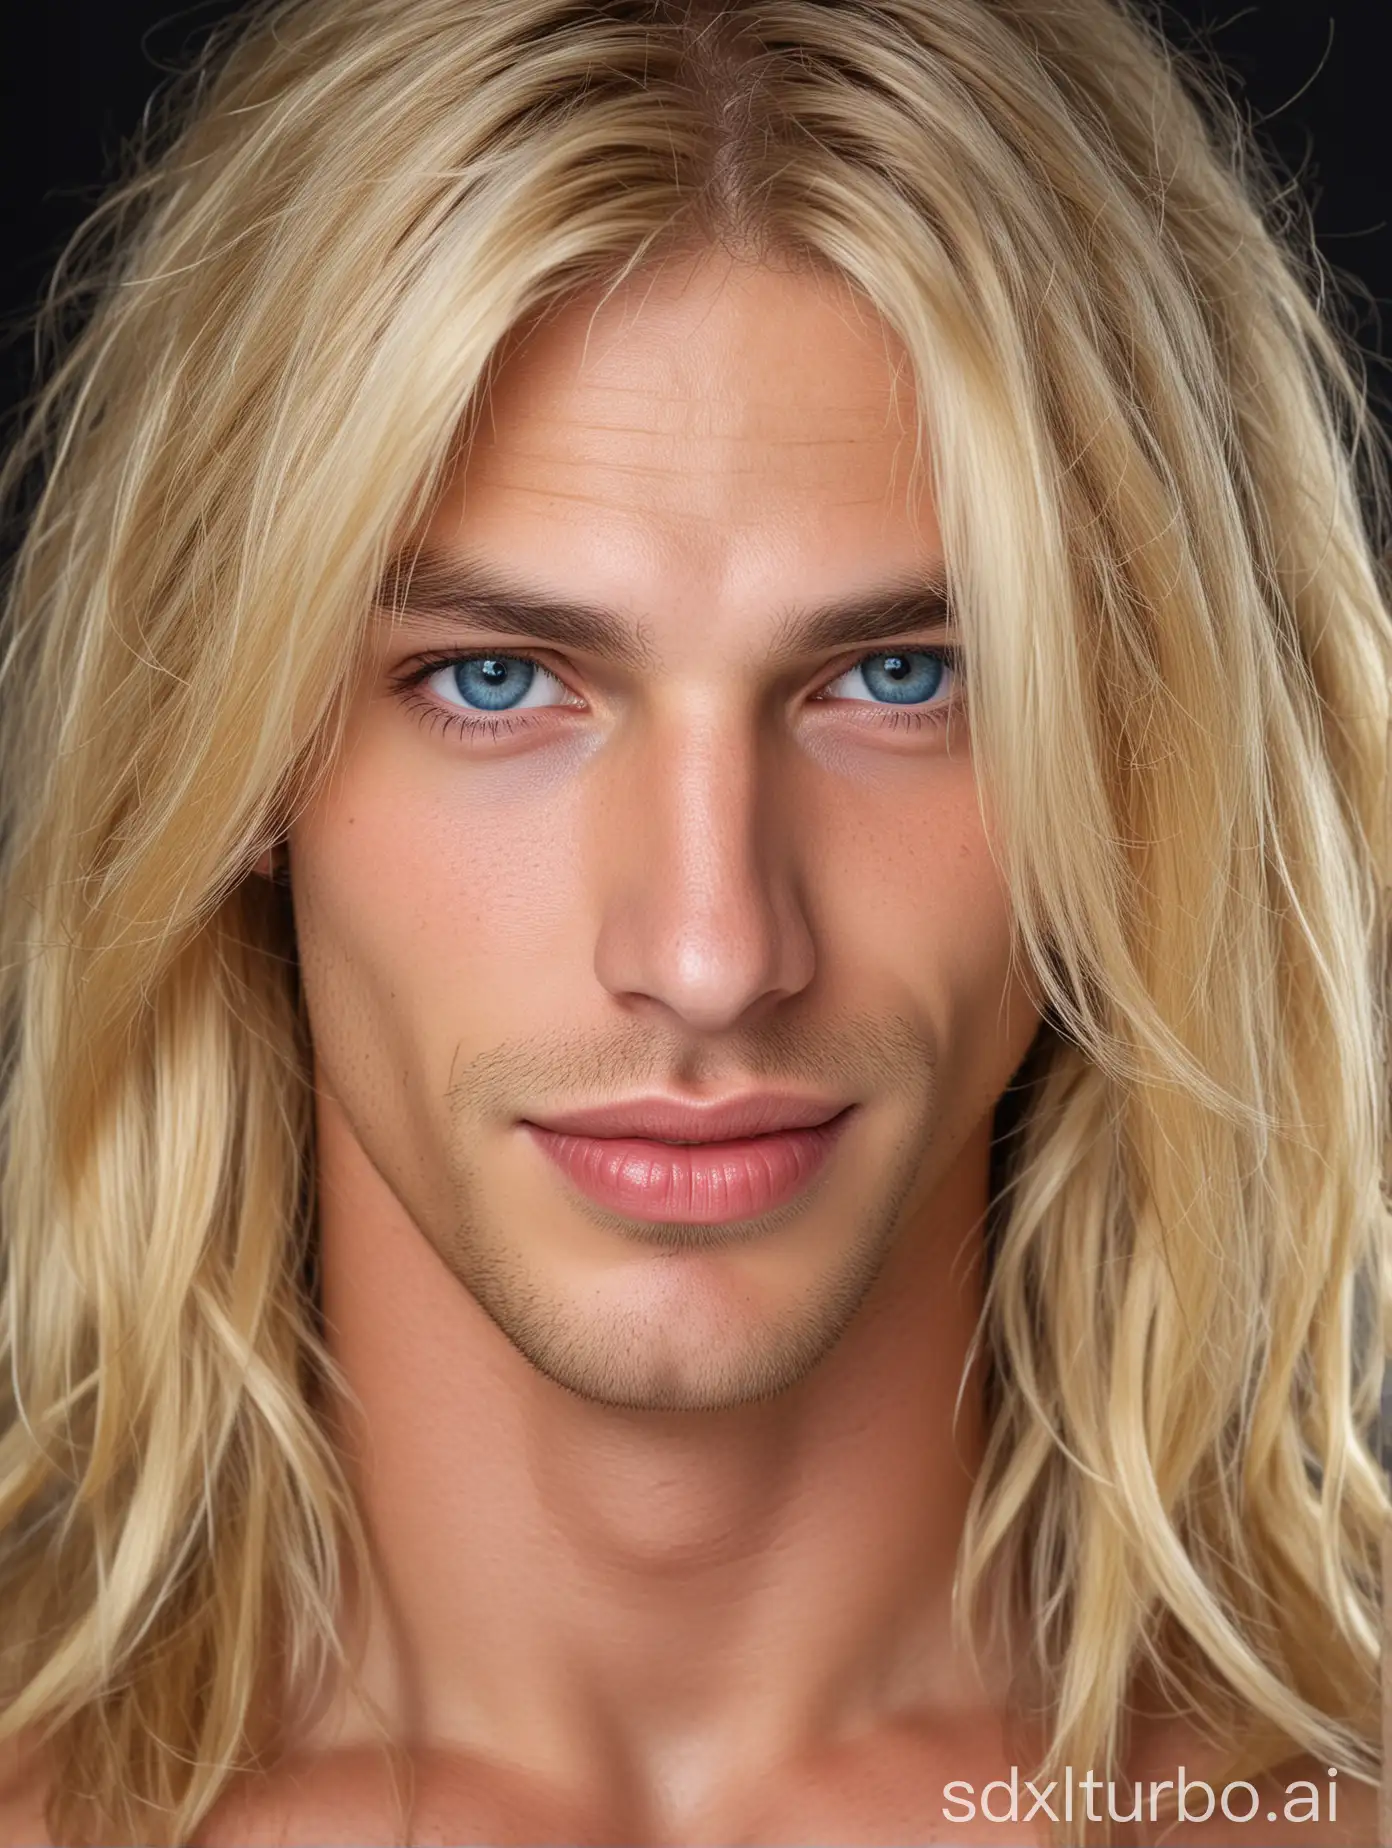 24 years long hair blonde Adonis happy face with sensual lips, blue eyes